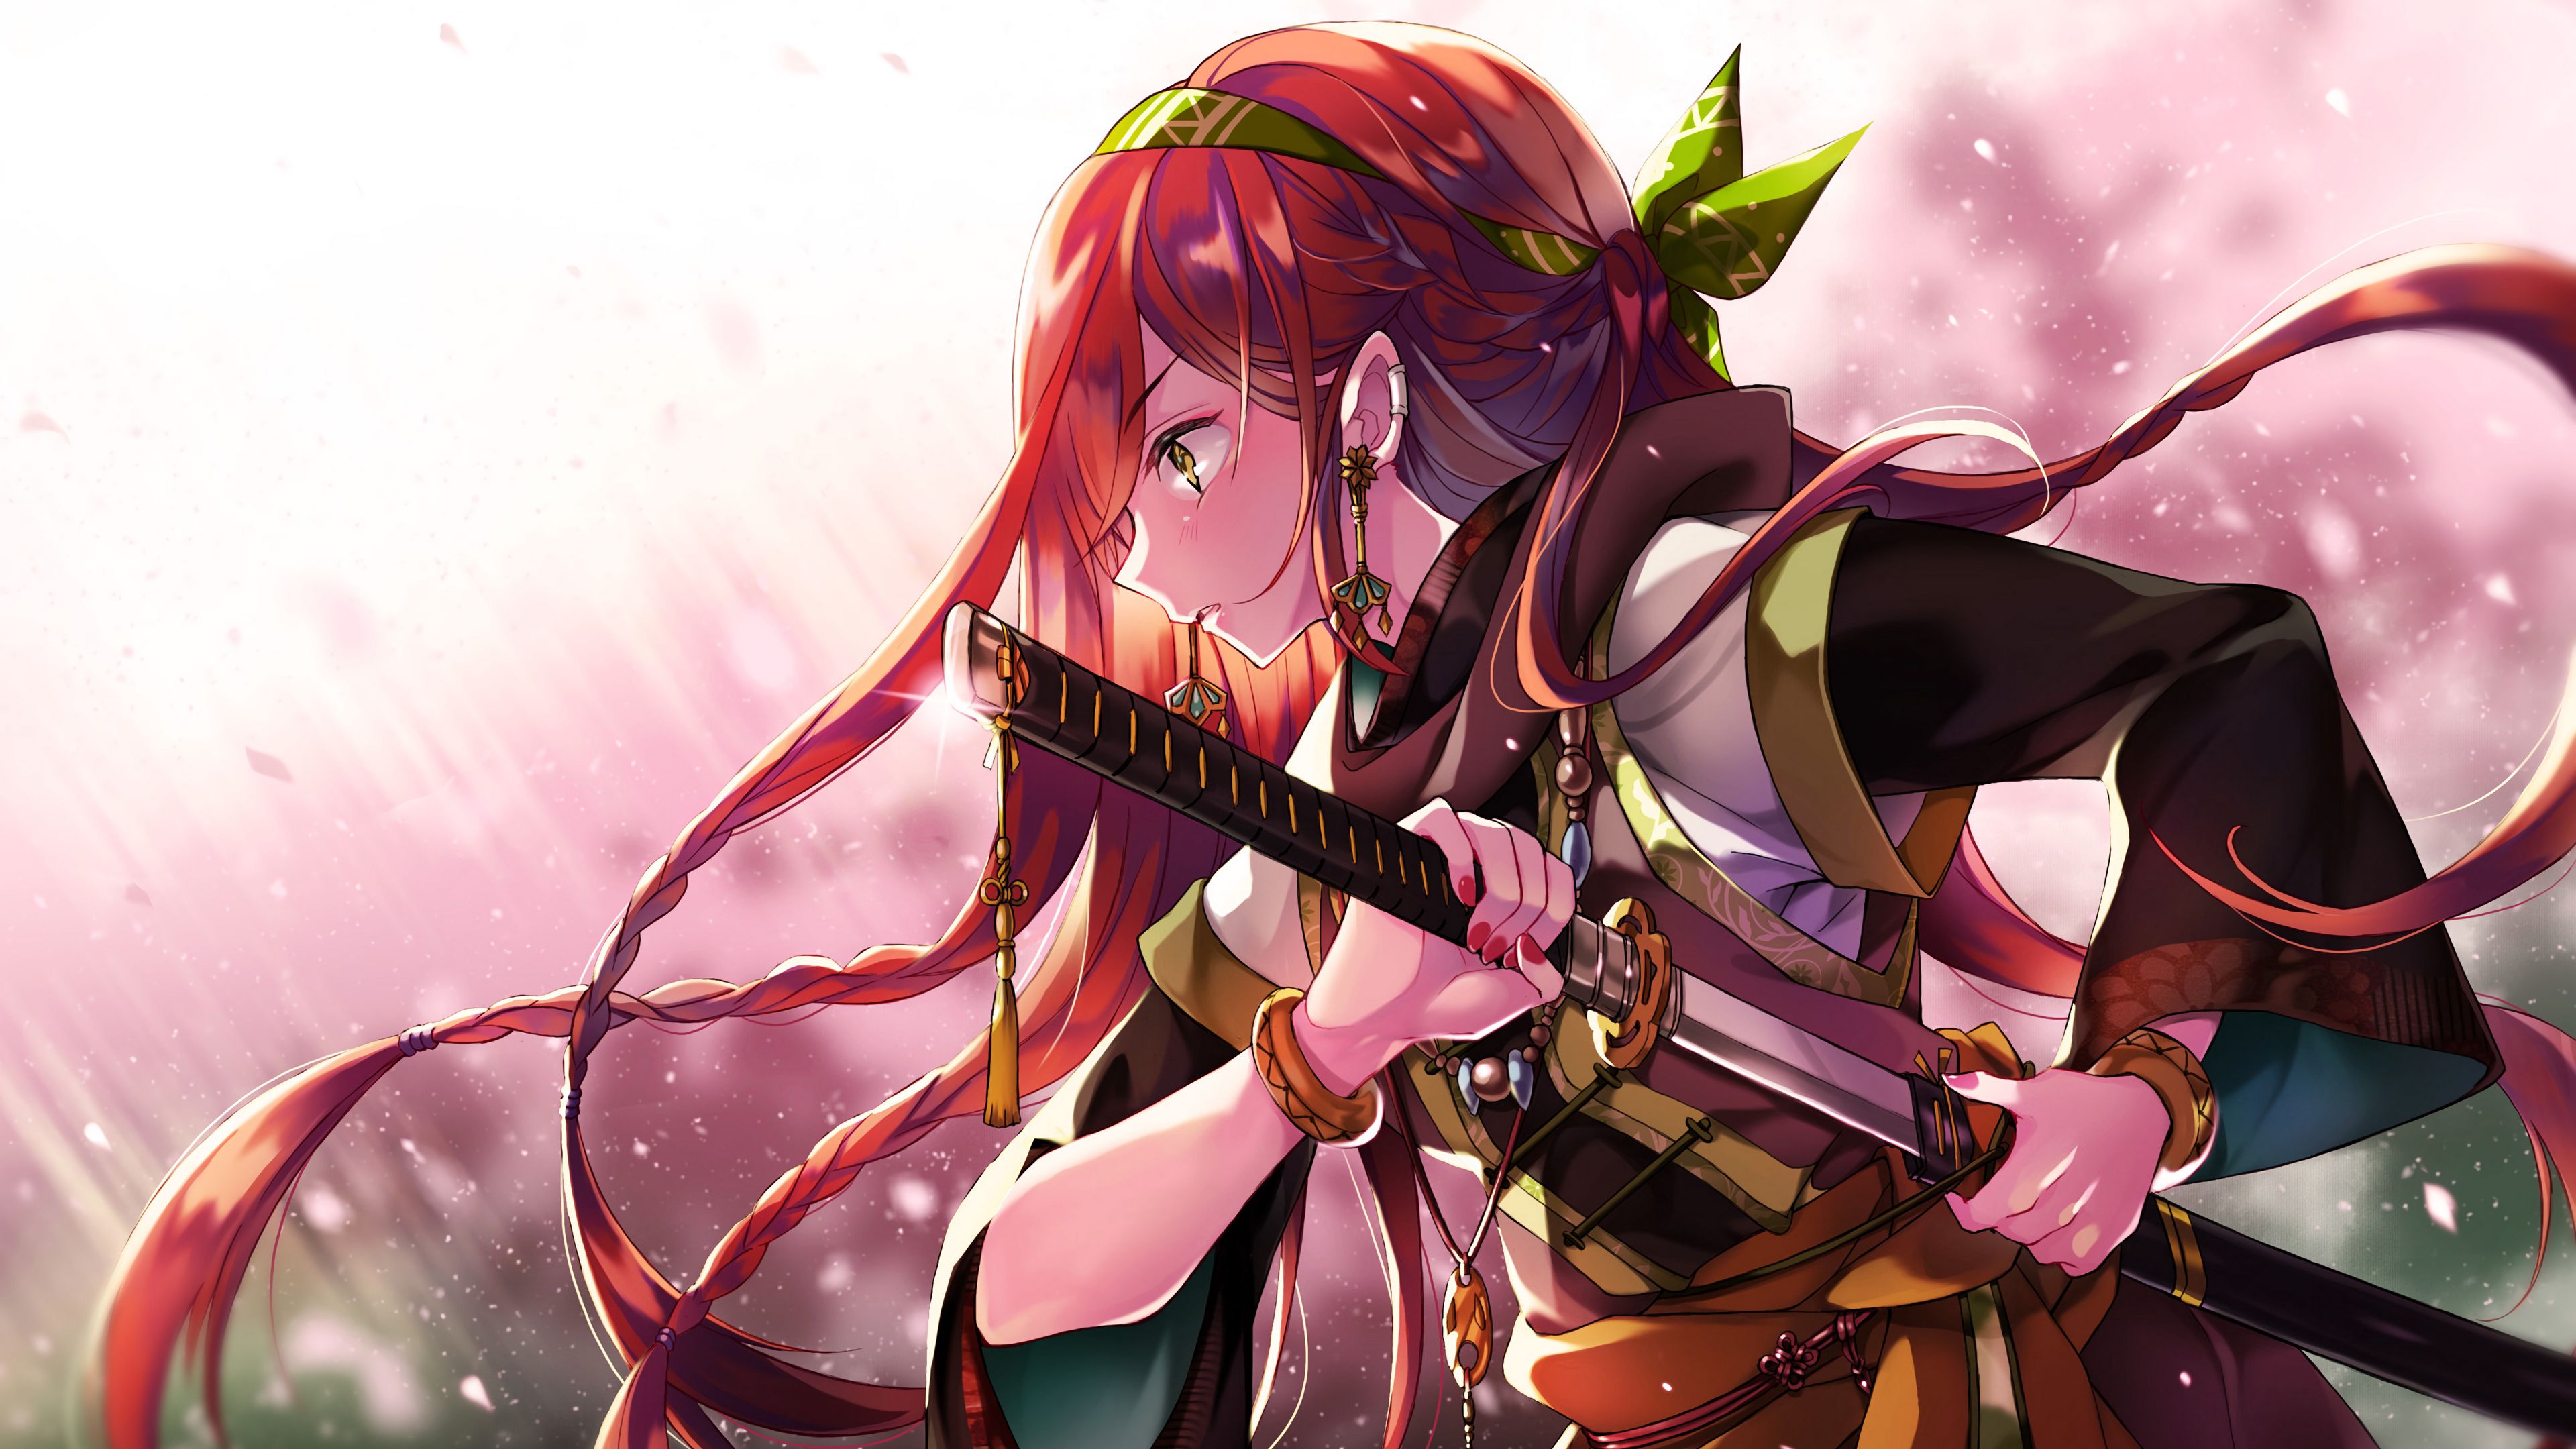 3840x2160 Warrior Anime Girl With Sword 4k Hd 4k Wallpapersimages Porn Sex Picture